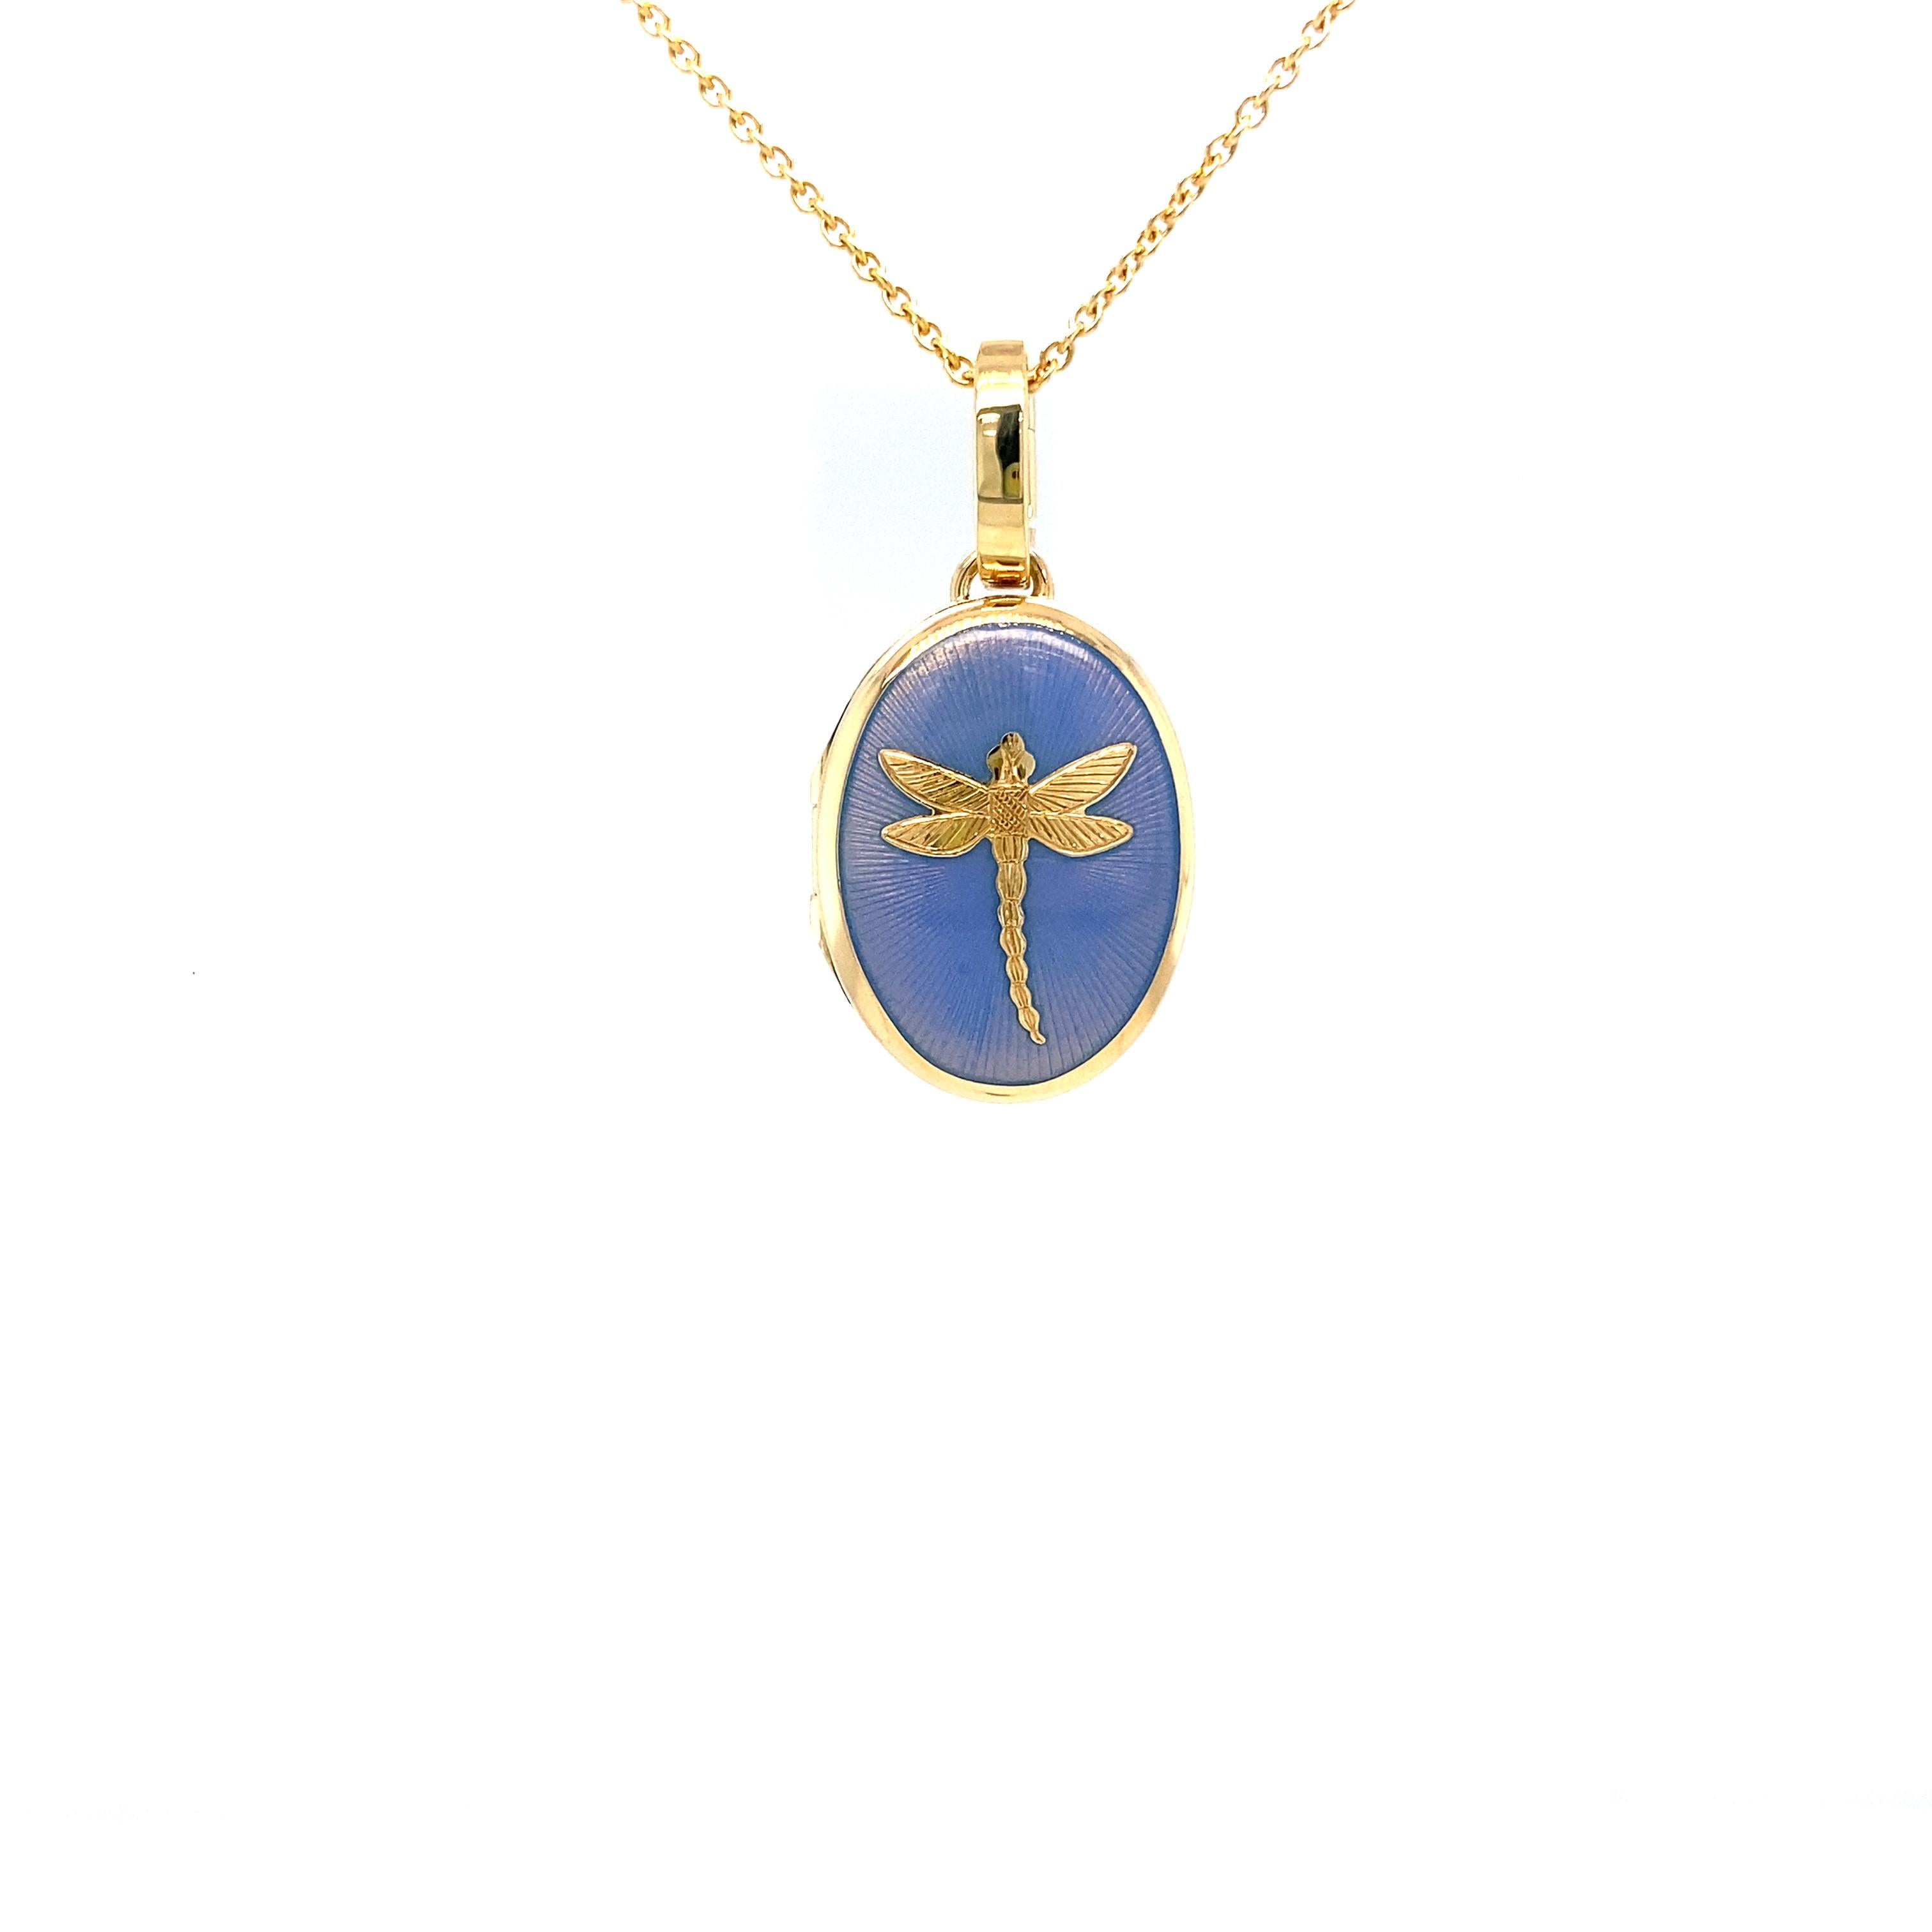 Oval Locket Pendant Necklace Dragonfly 18k Yellow Gold - Opalescent Blue Enamel For Sale 3